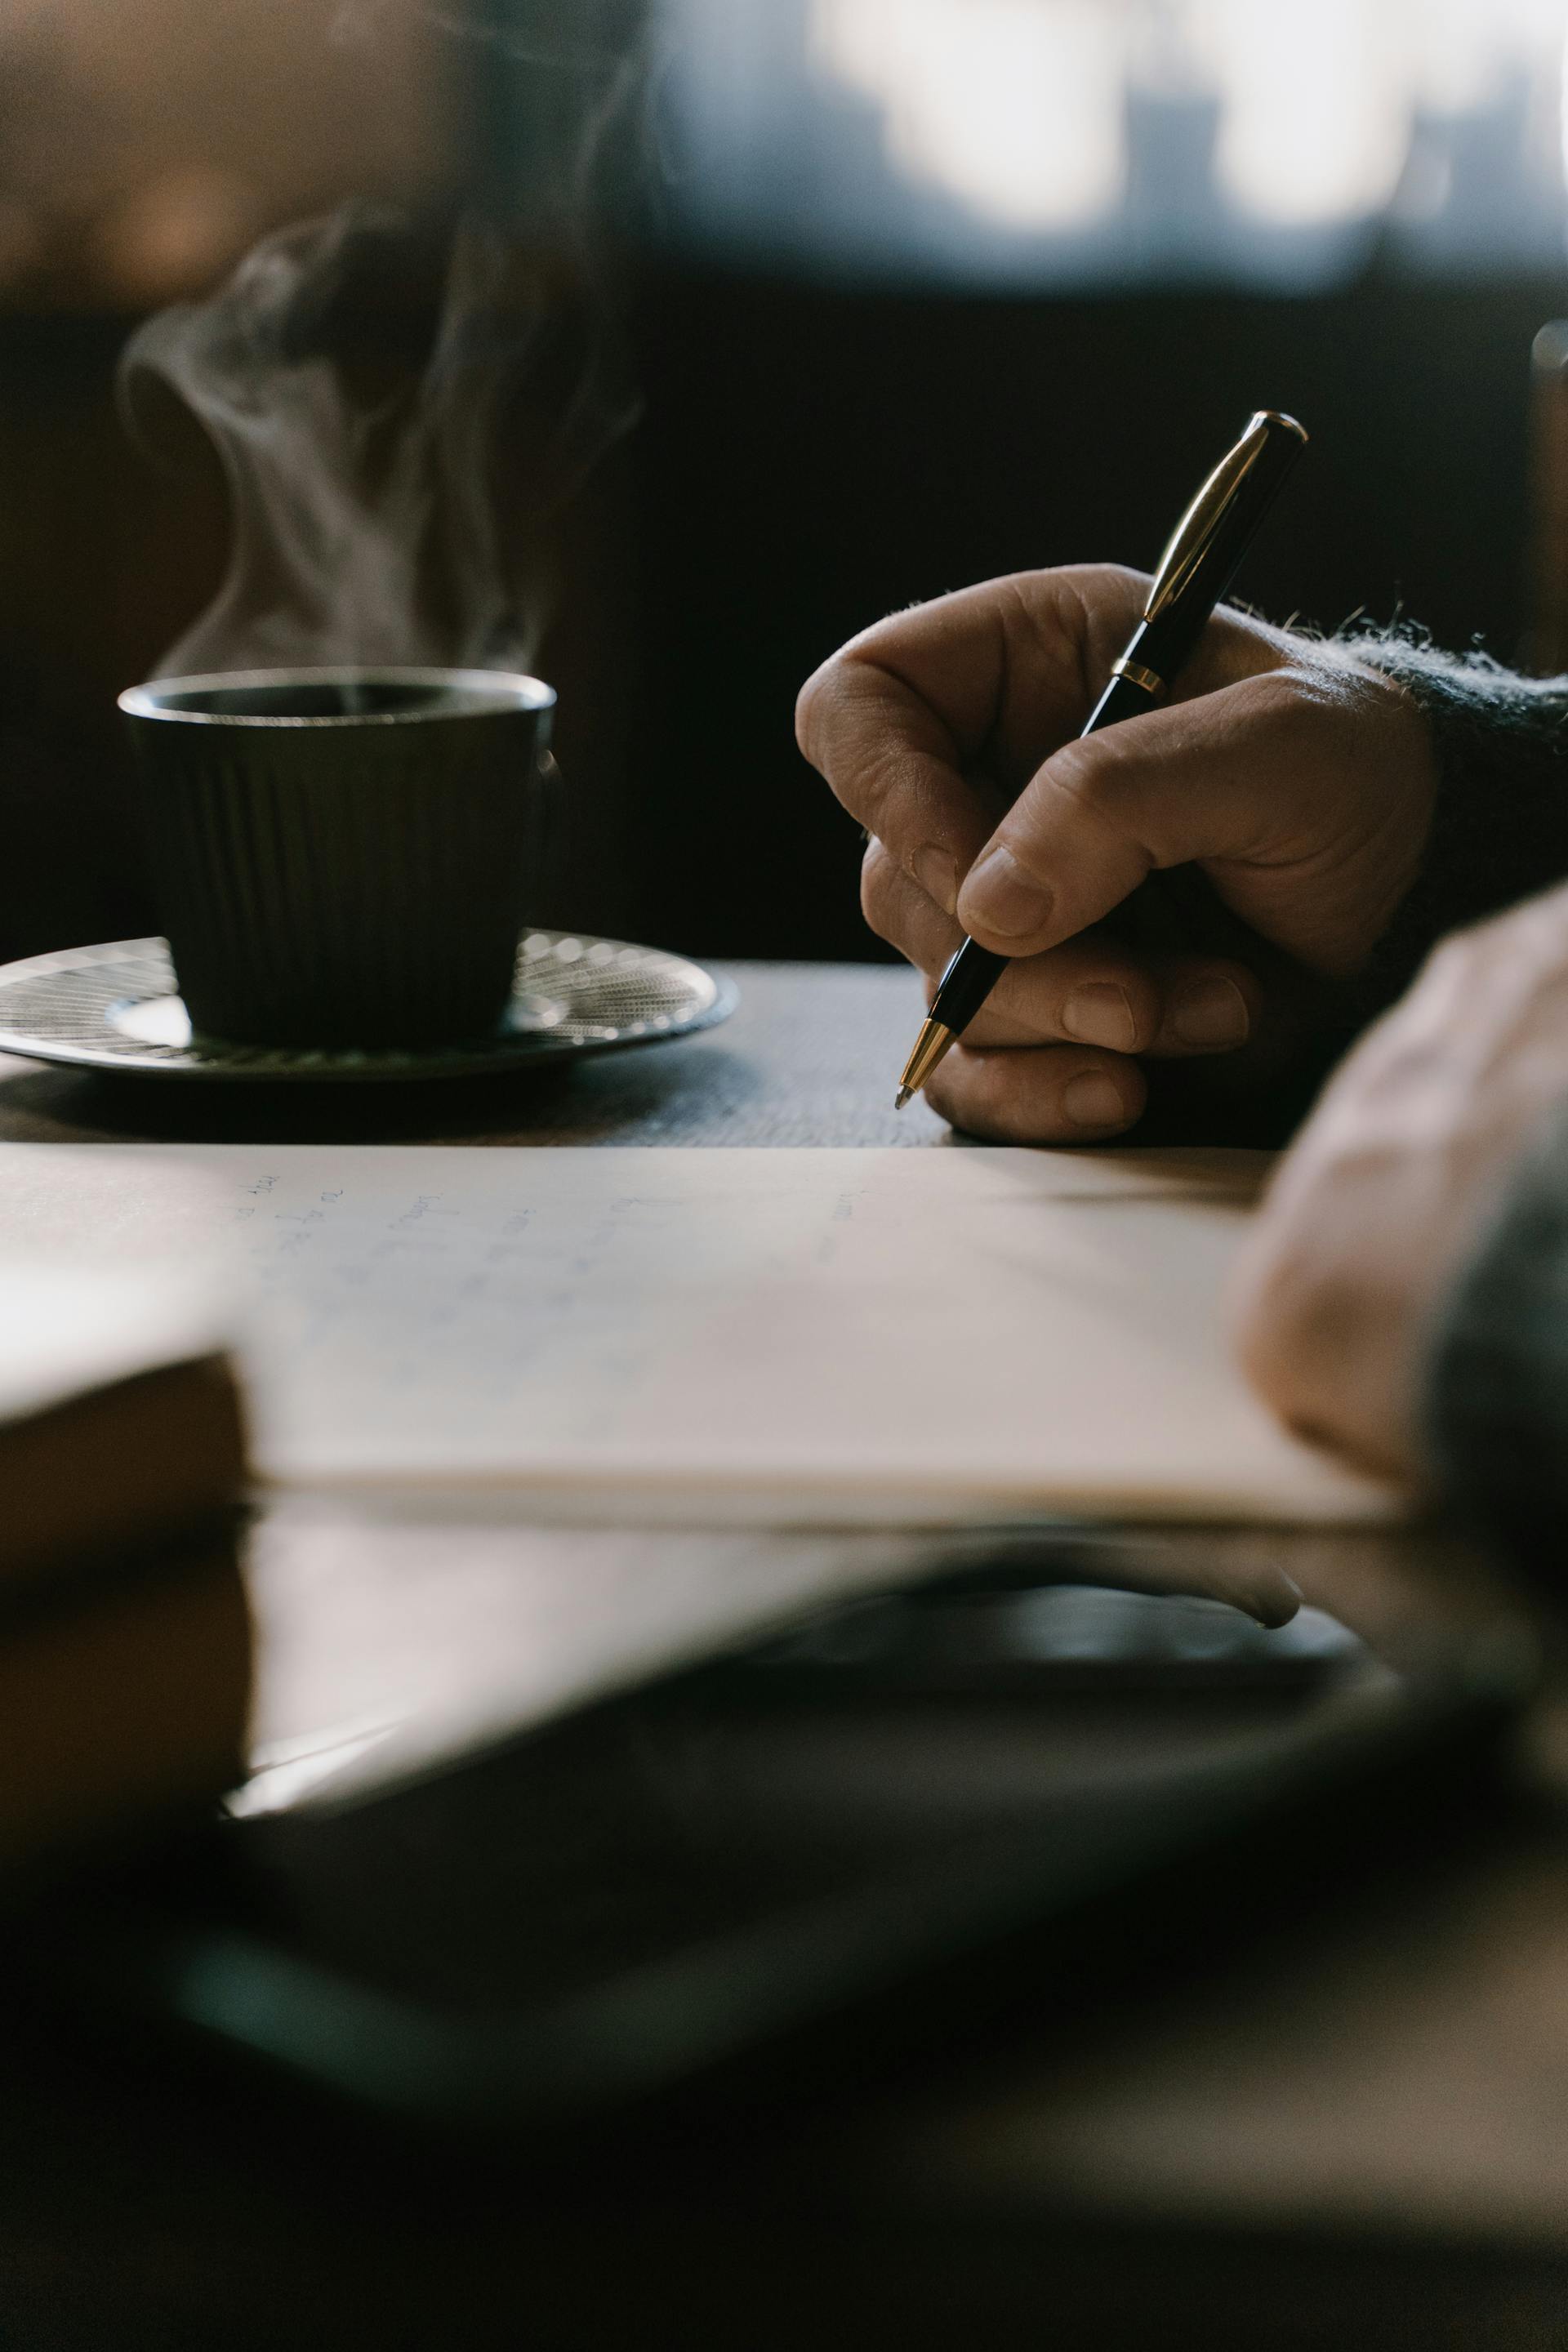 A person writing a letter | Source: Pexels